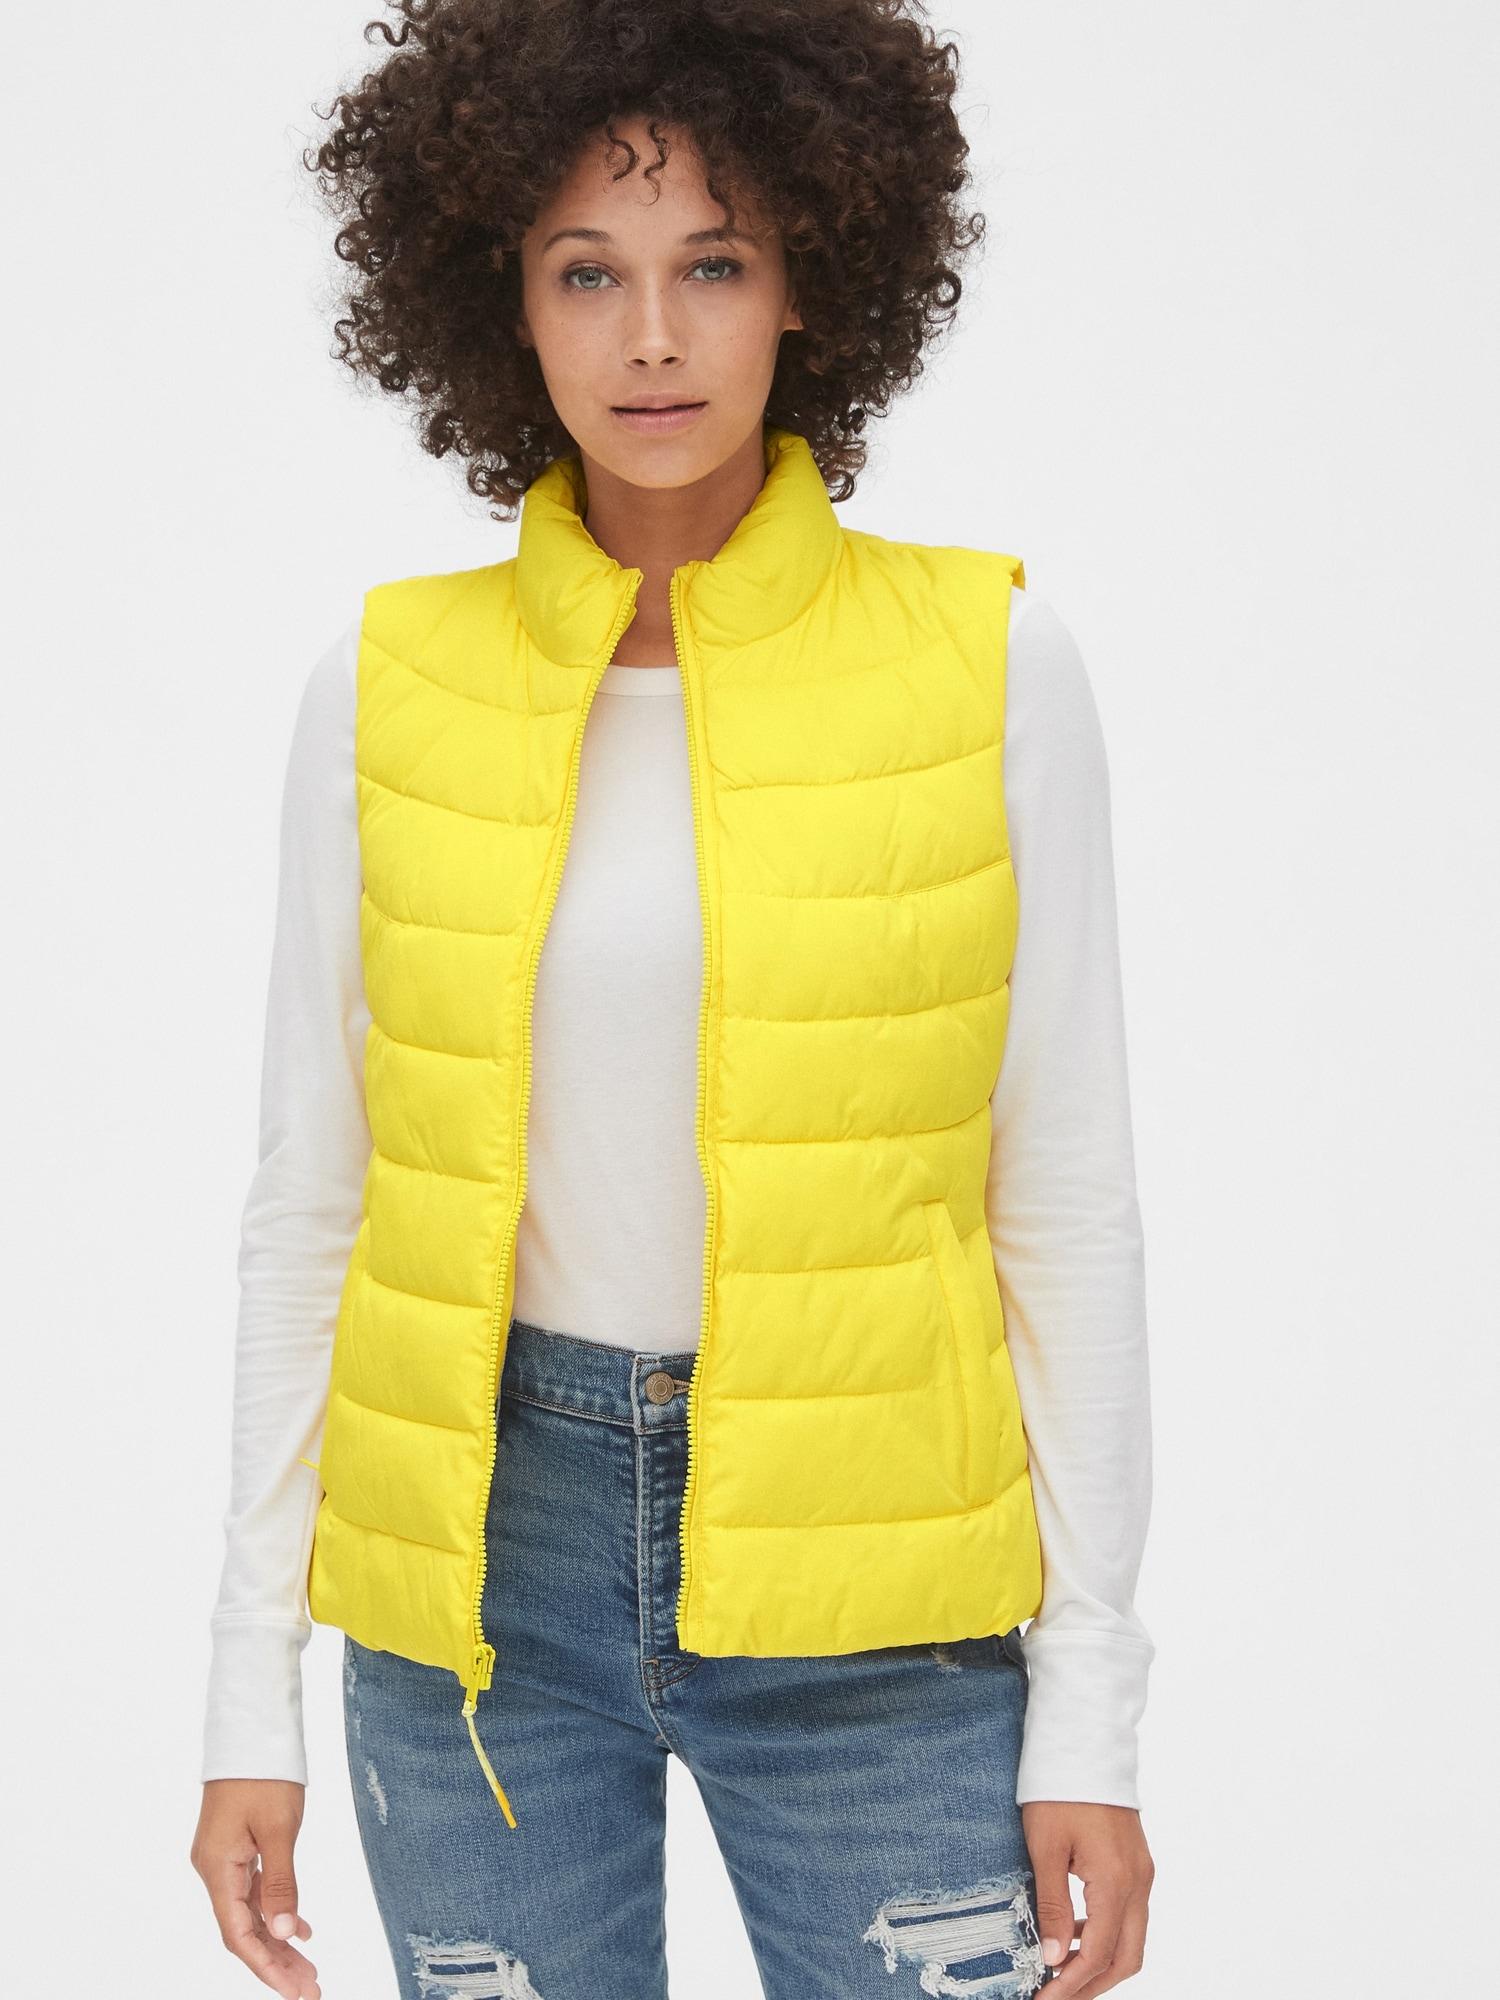 Gap Synthetic Coldcontrol Lightweight Puffer Vest in Yellow - Lyst